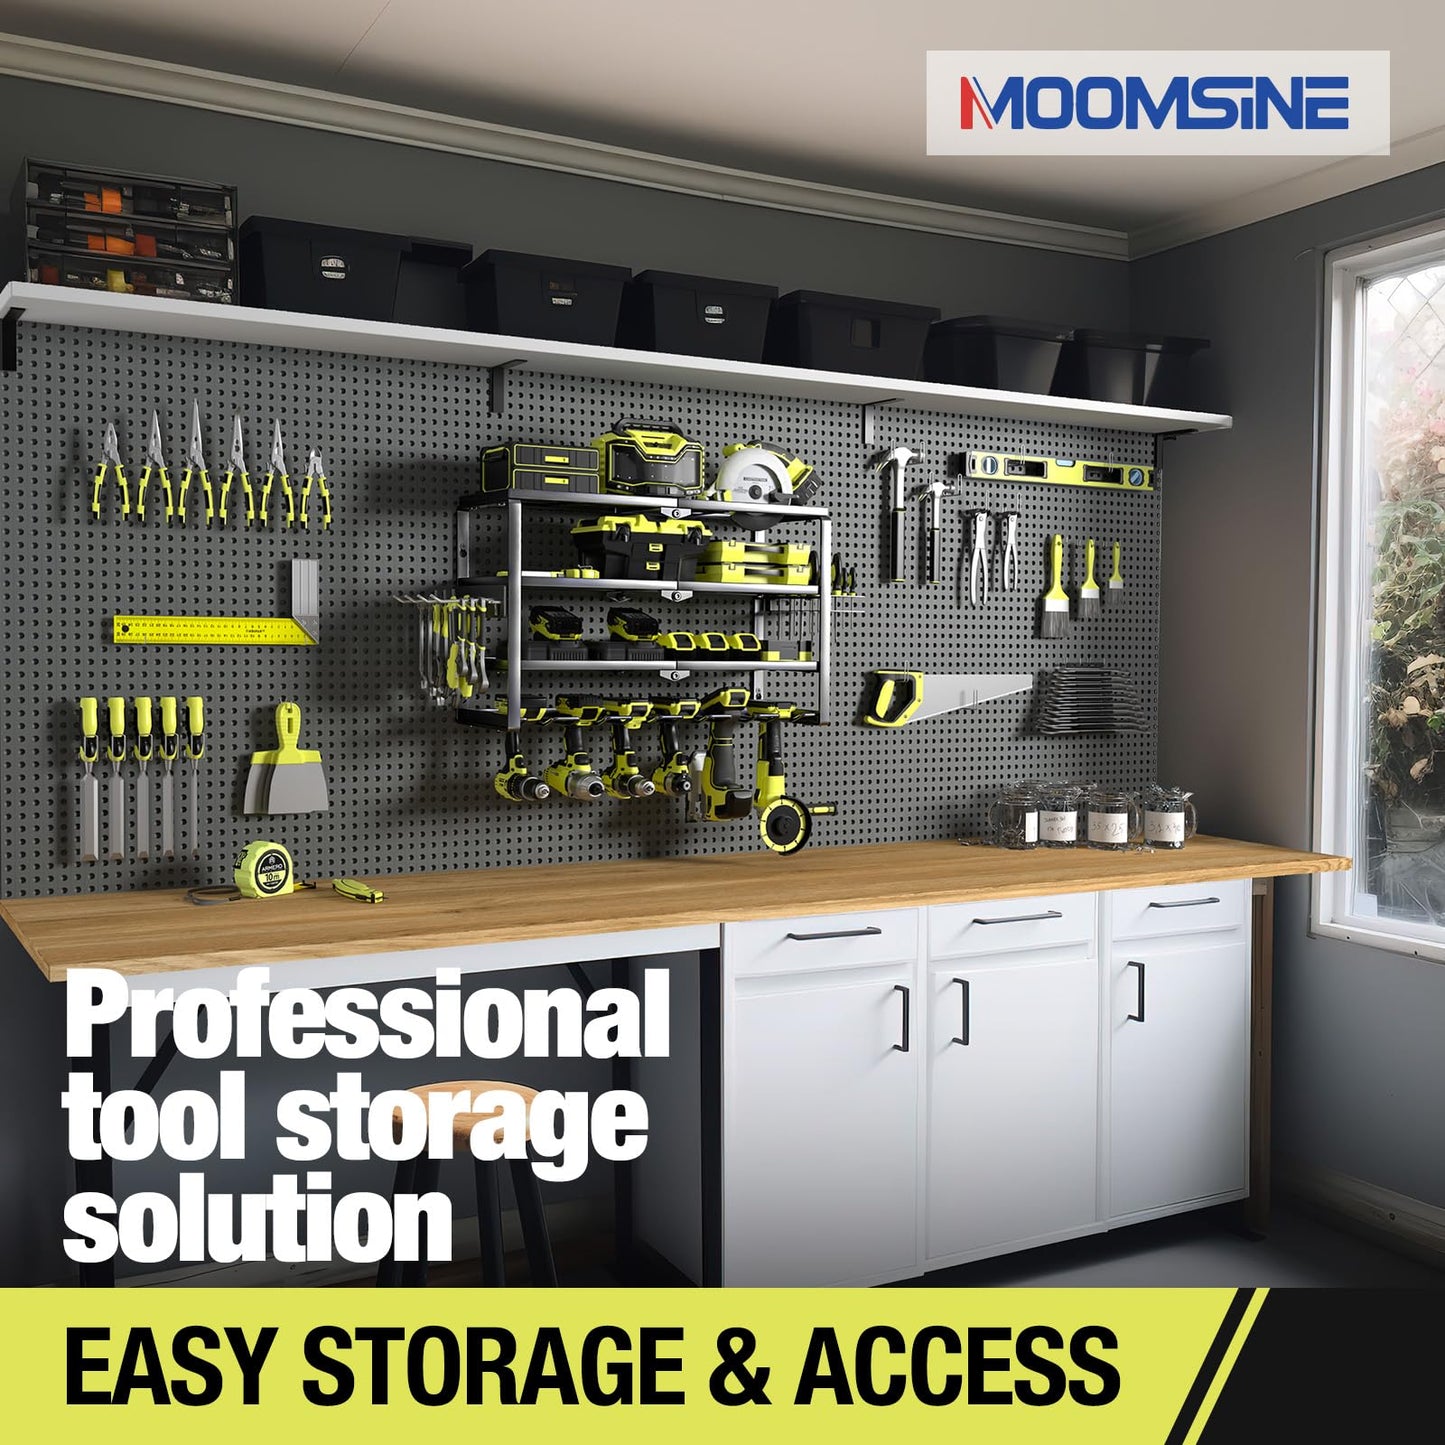 MOOMSINE 4 Layer Power Tool Organizer Wall Mount, Battery Tools Holder with Charging Station Shelf, Cordless Drill Hanger Storage Rack for Garage